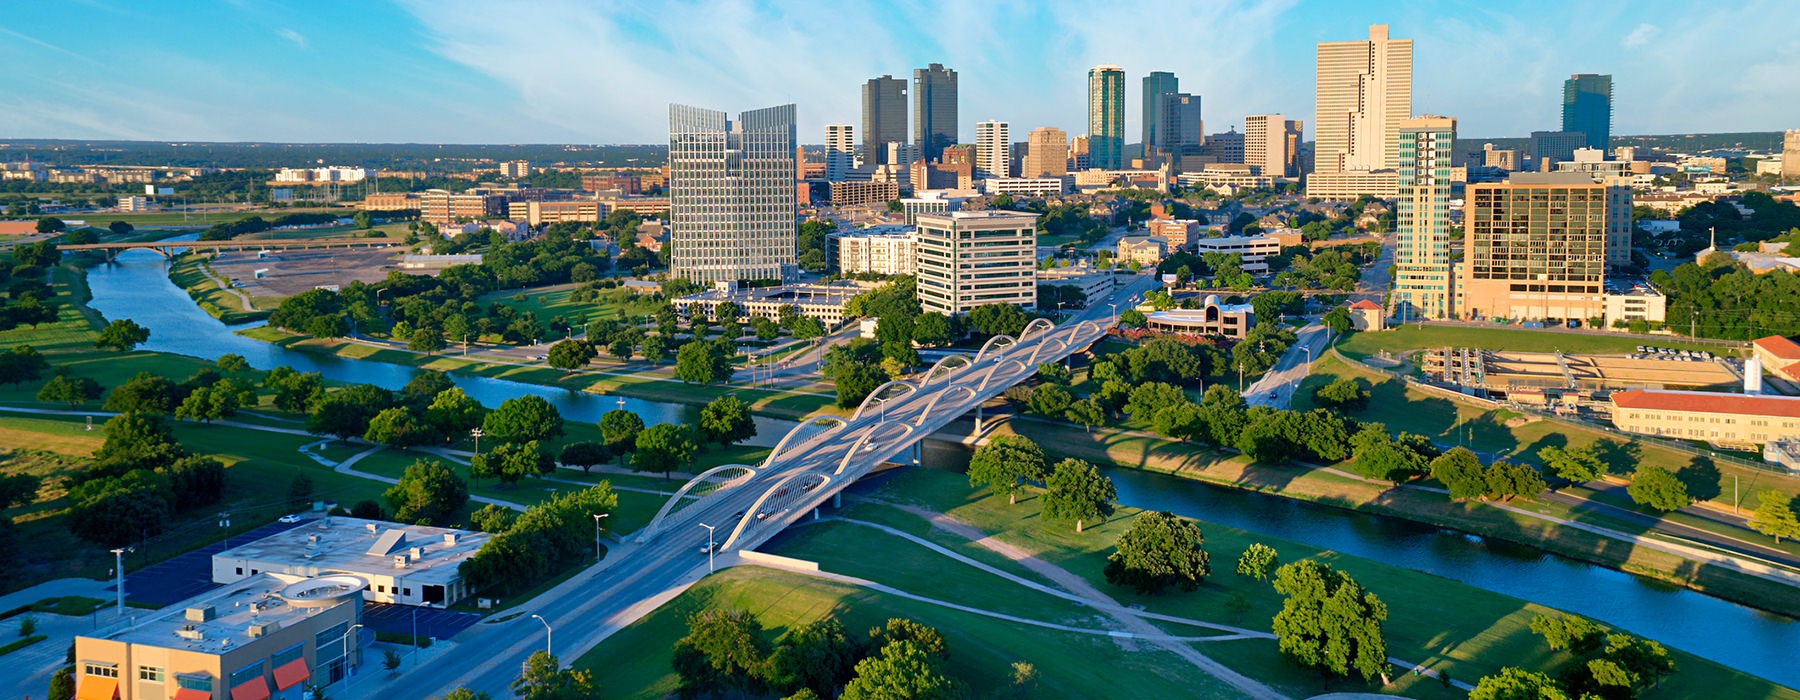 Aerial view of downtown Fort Worth